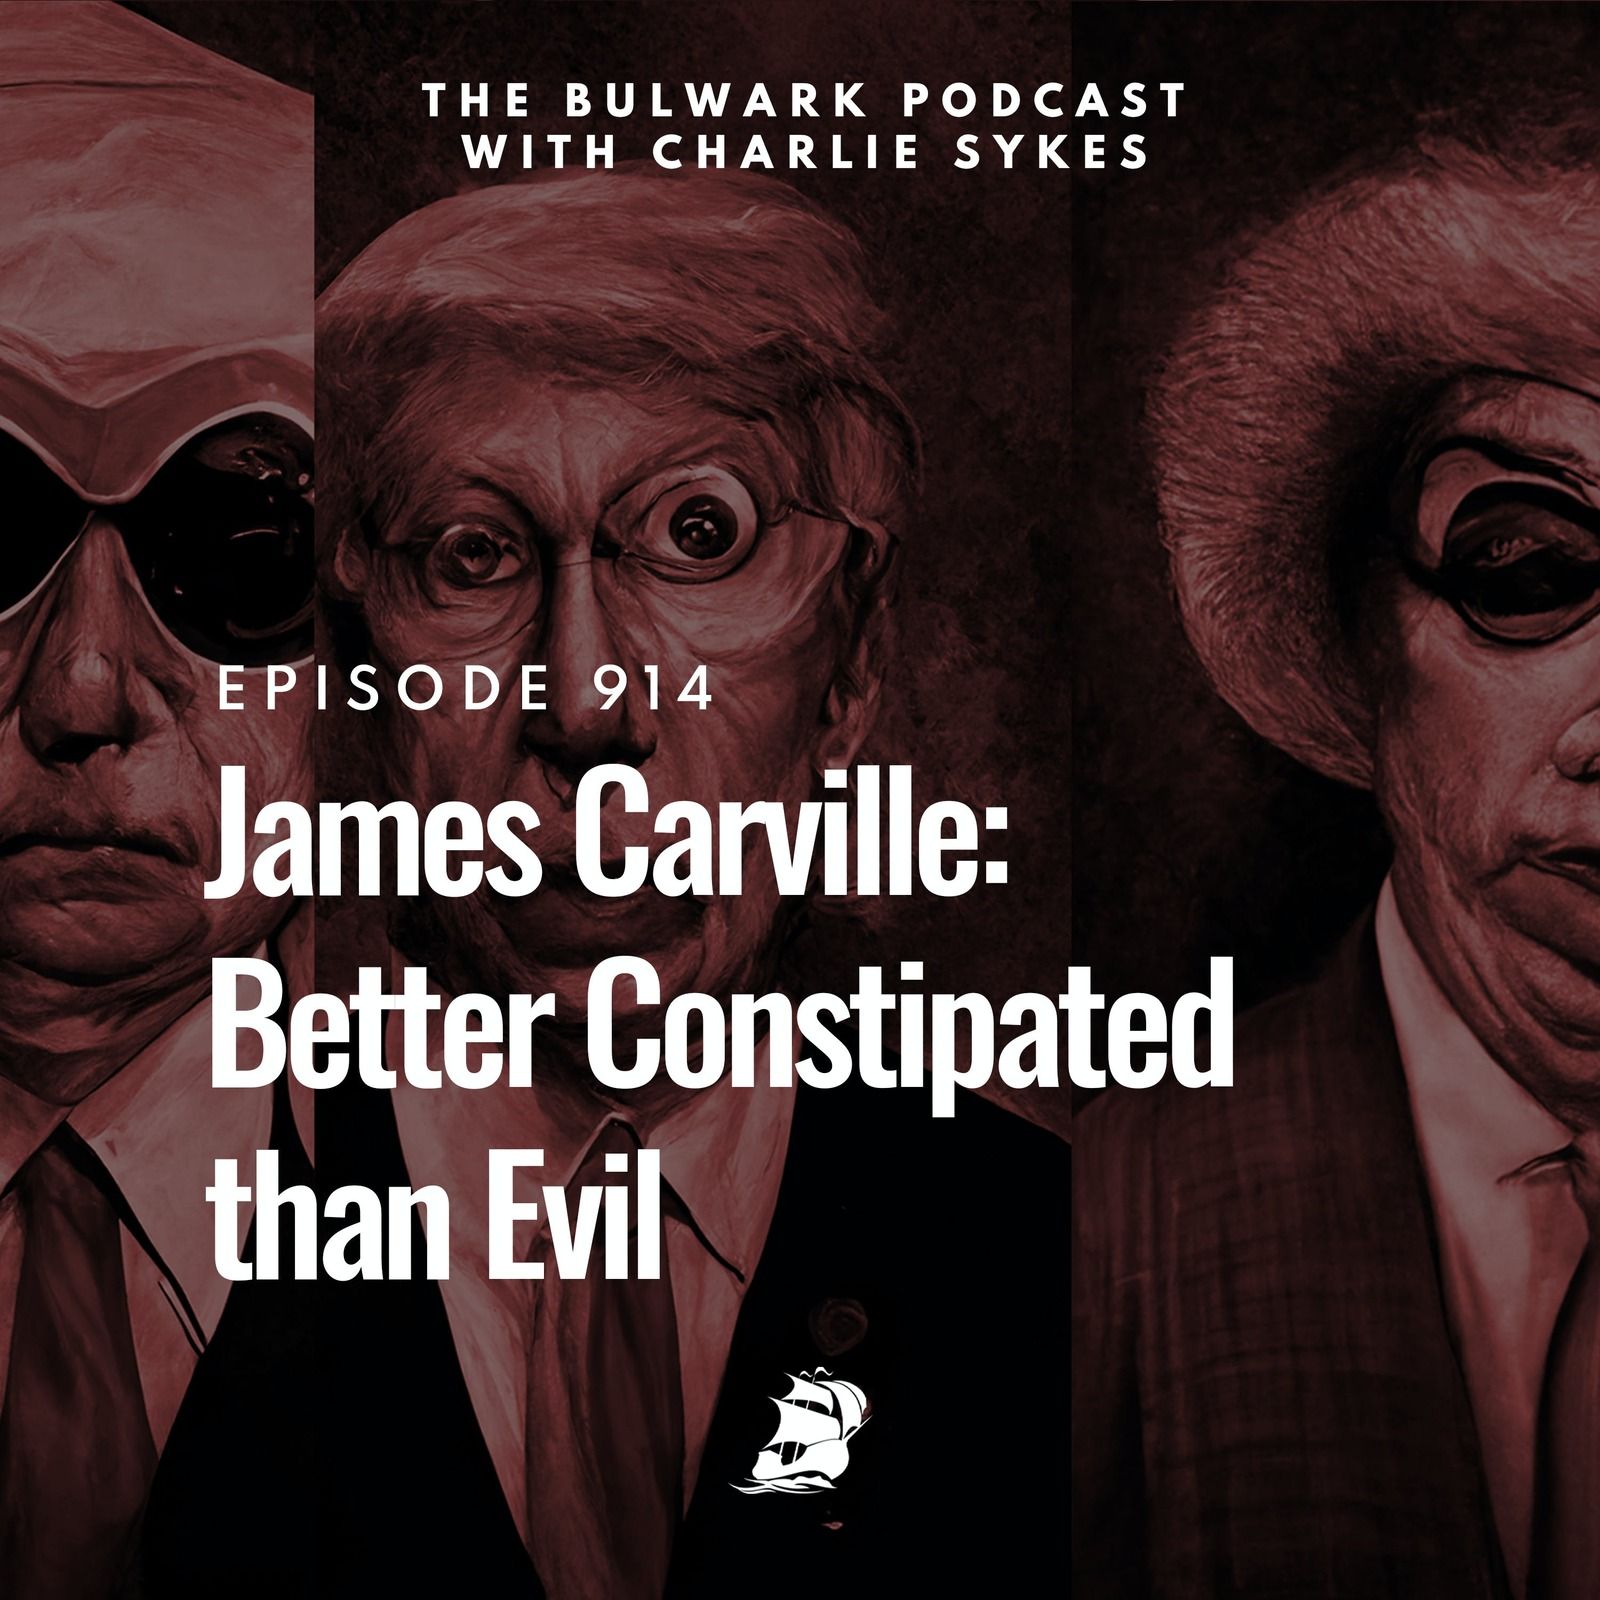 James Carville: Better Constipated than Evil by The Bulwark Podcast